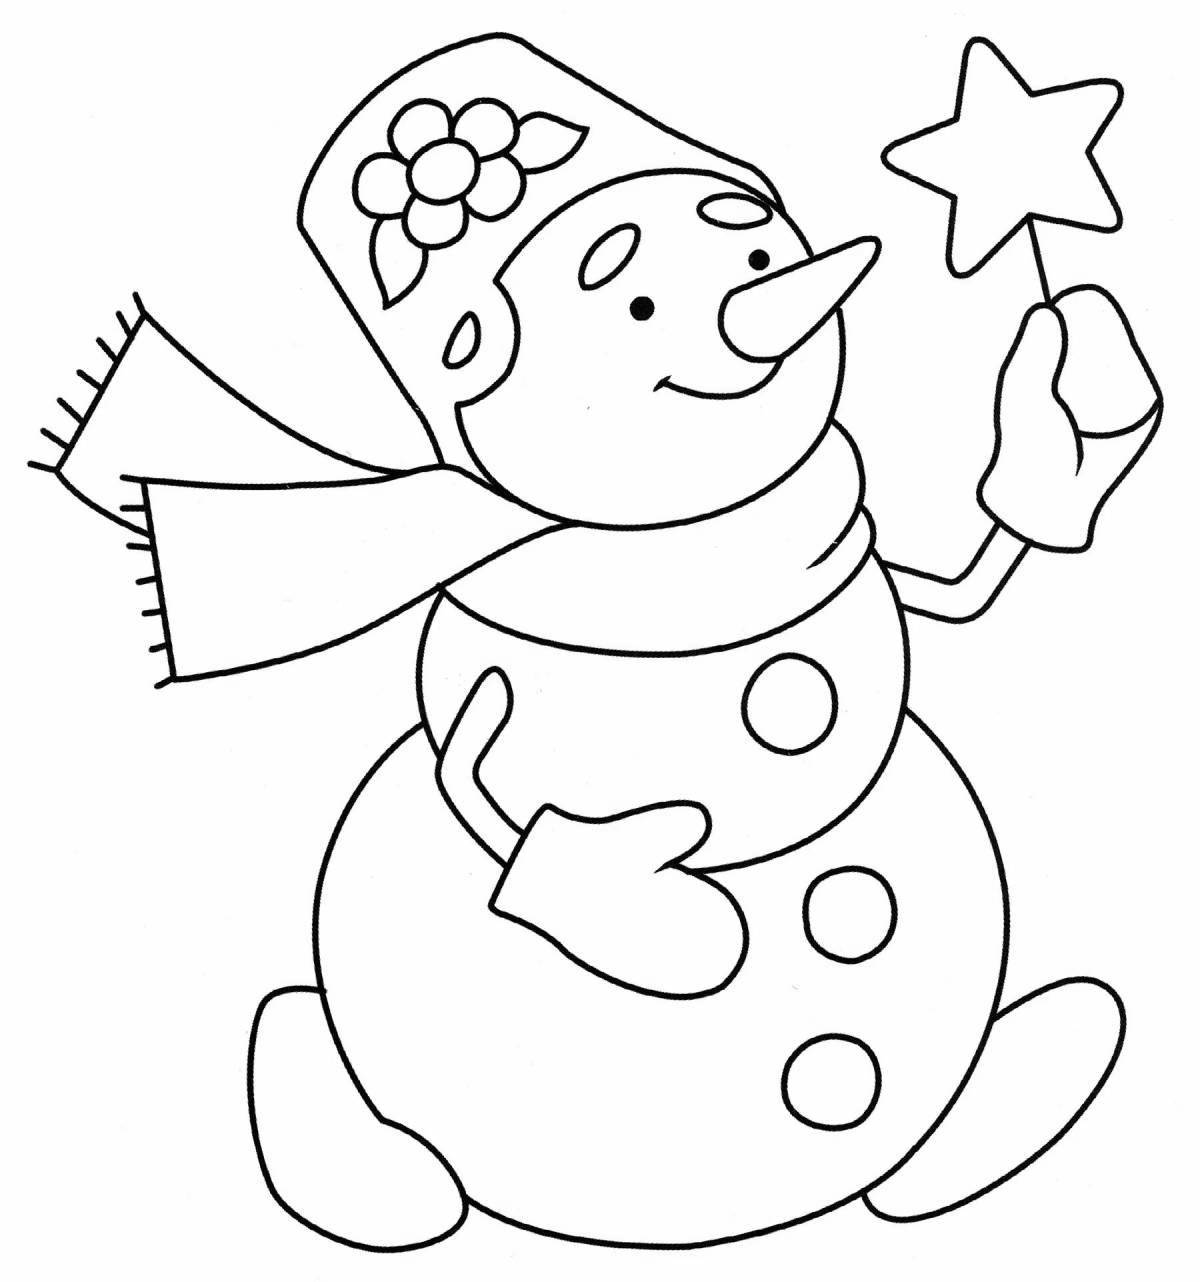 Fancy coloring funny snowman for kids